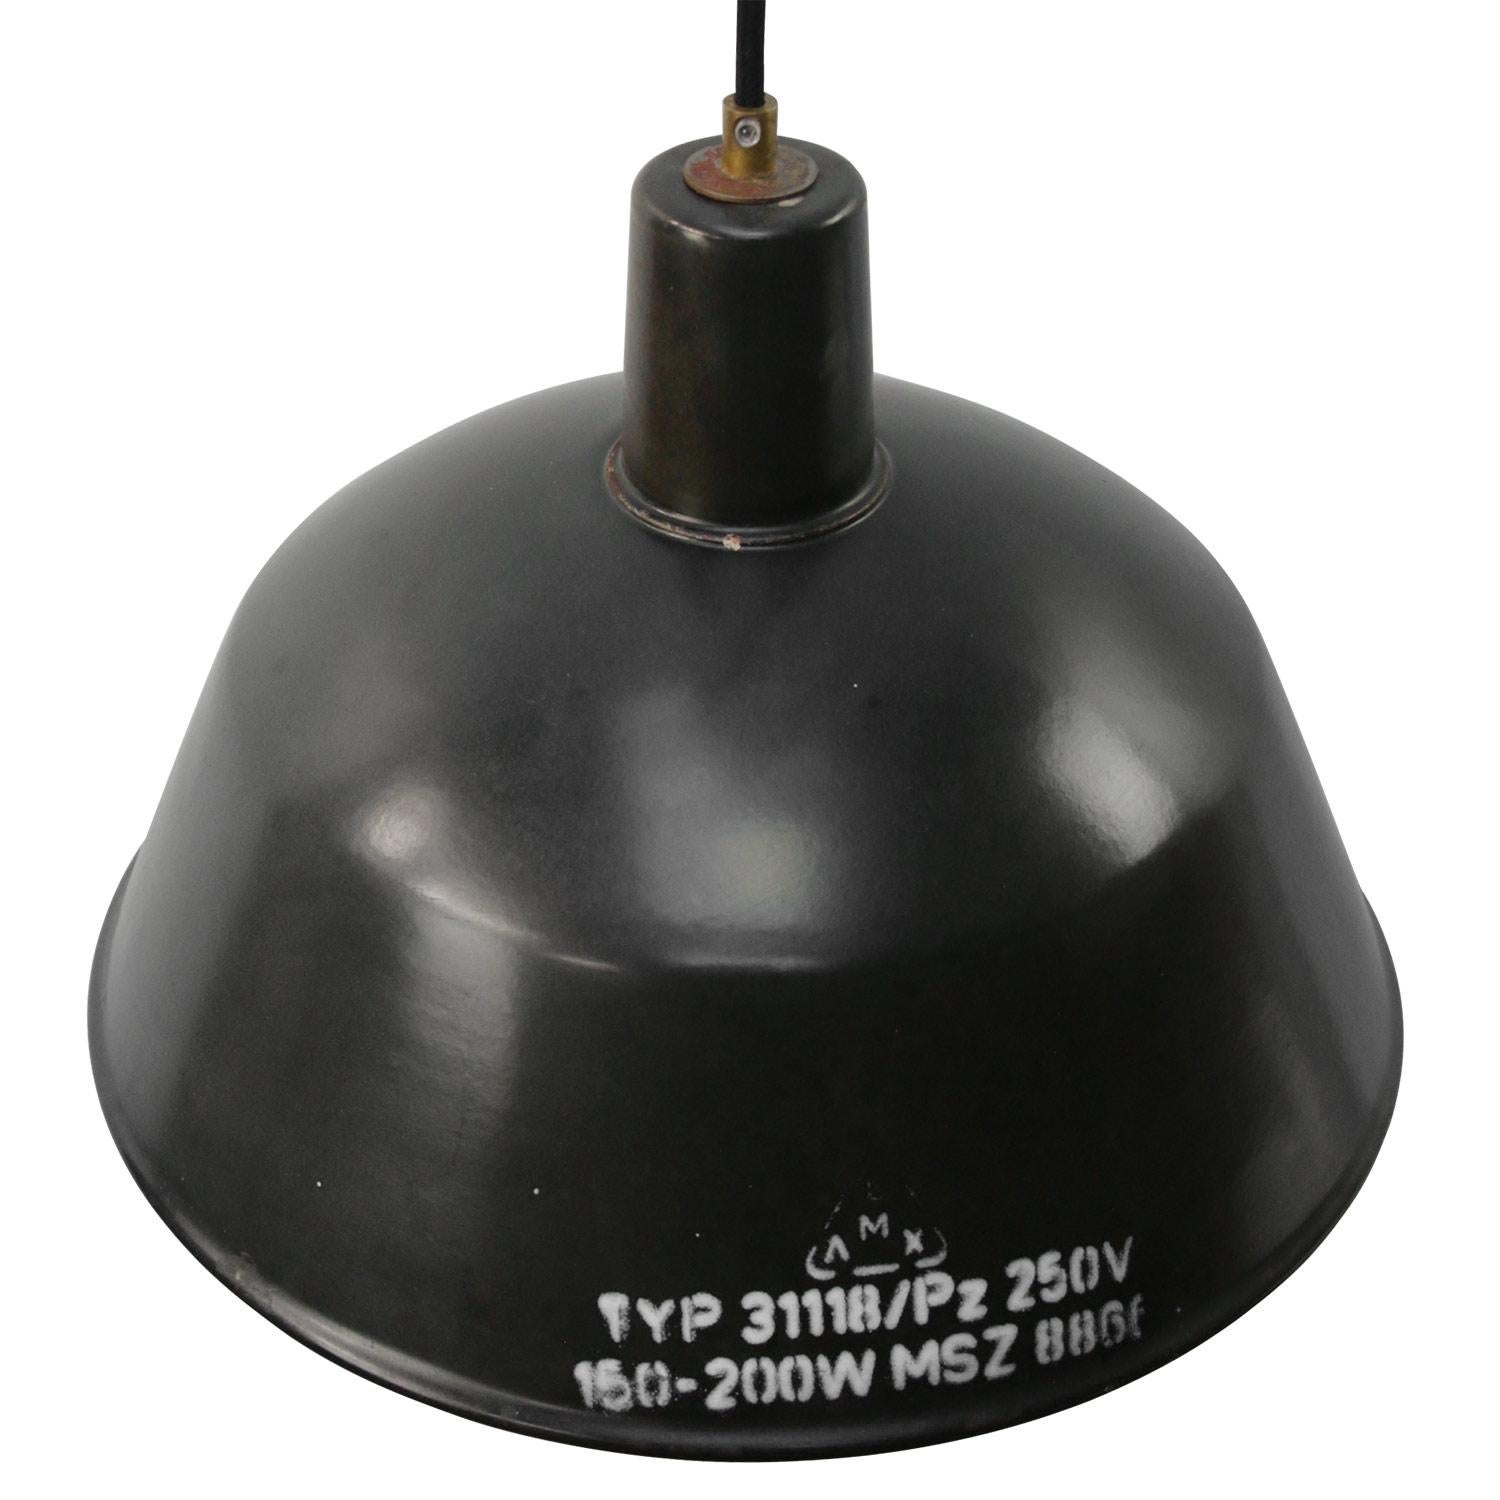 Black industrial pendant. 
Black enamel with white type, white interior

Weight: 2.00 kg / 4.4 lb

Priced per individual item. All lamps have been made suitable by international standards for incandescent light bulbs, energy-efficient and LED